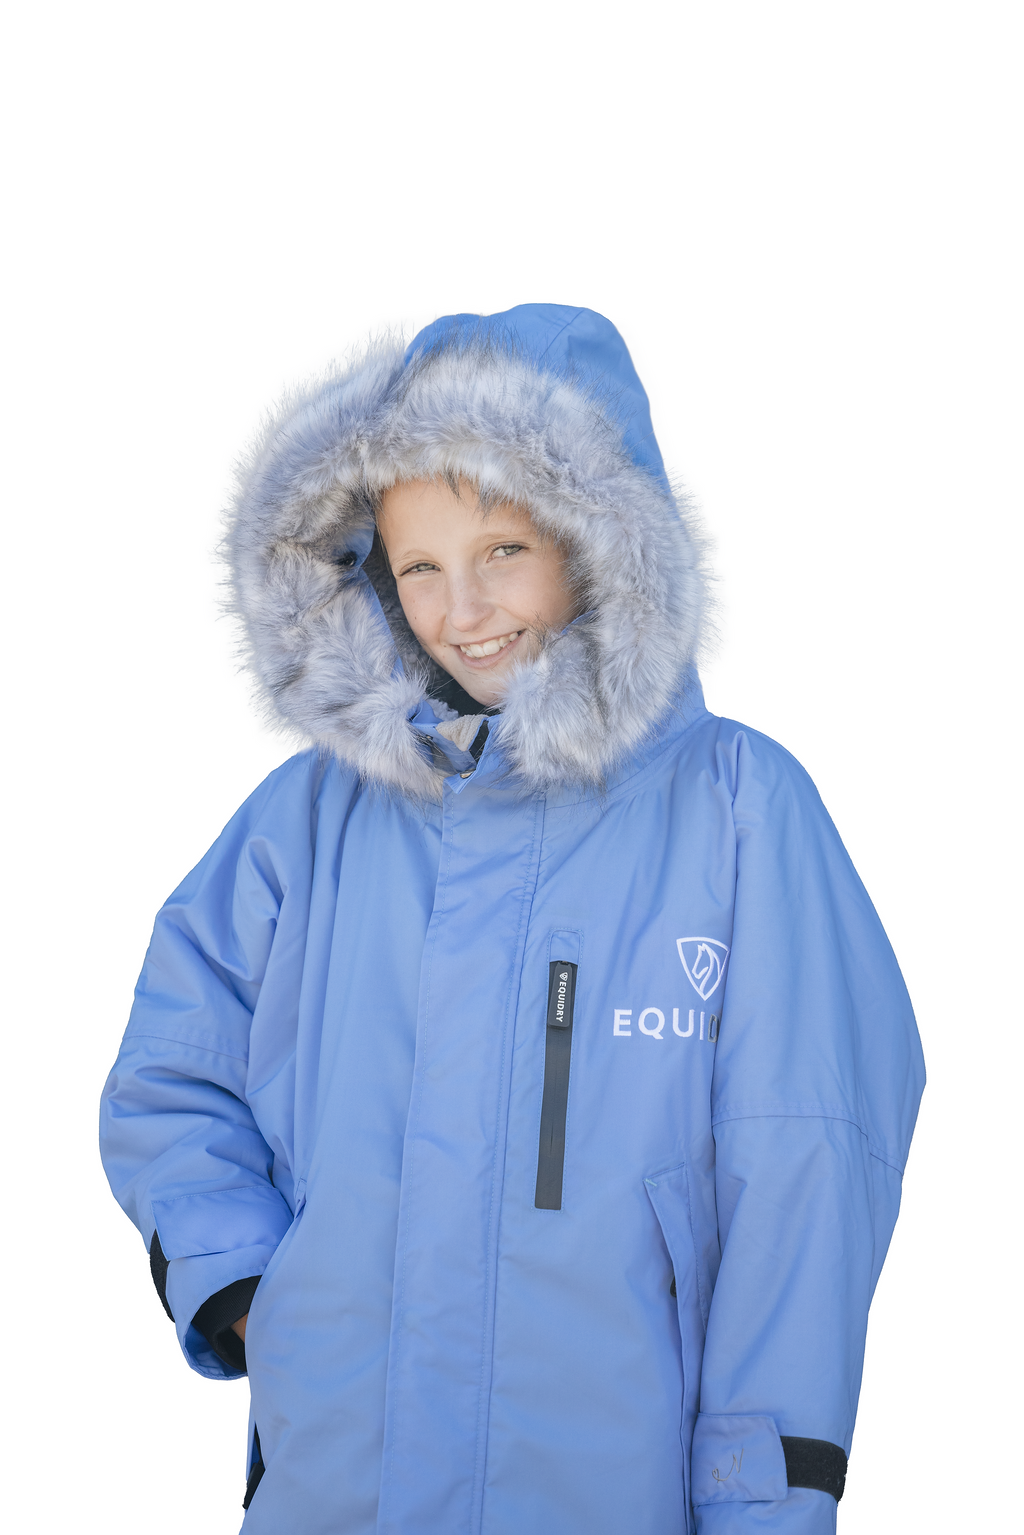 EQUIDRY | All Rounder Lux Children's | Bambi Blue